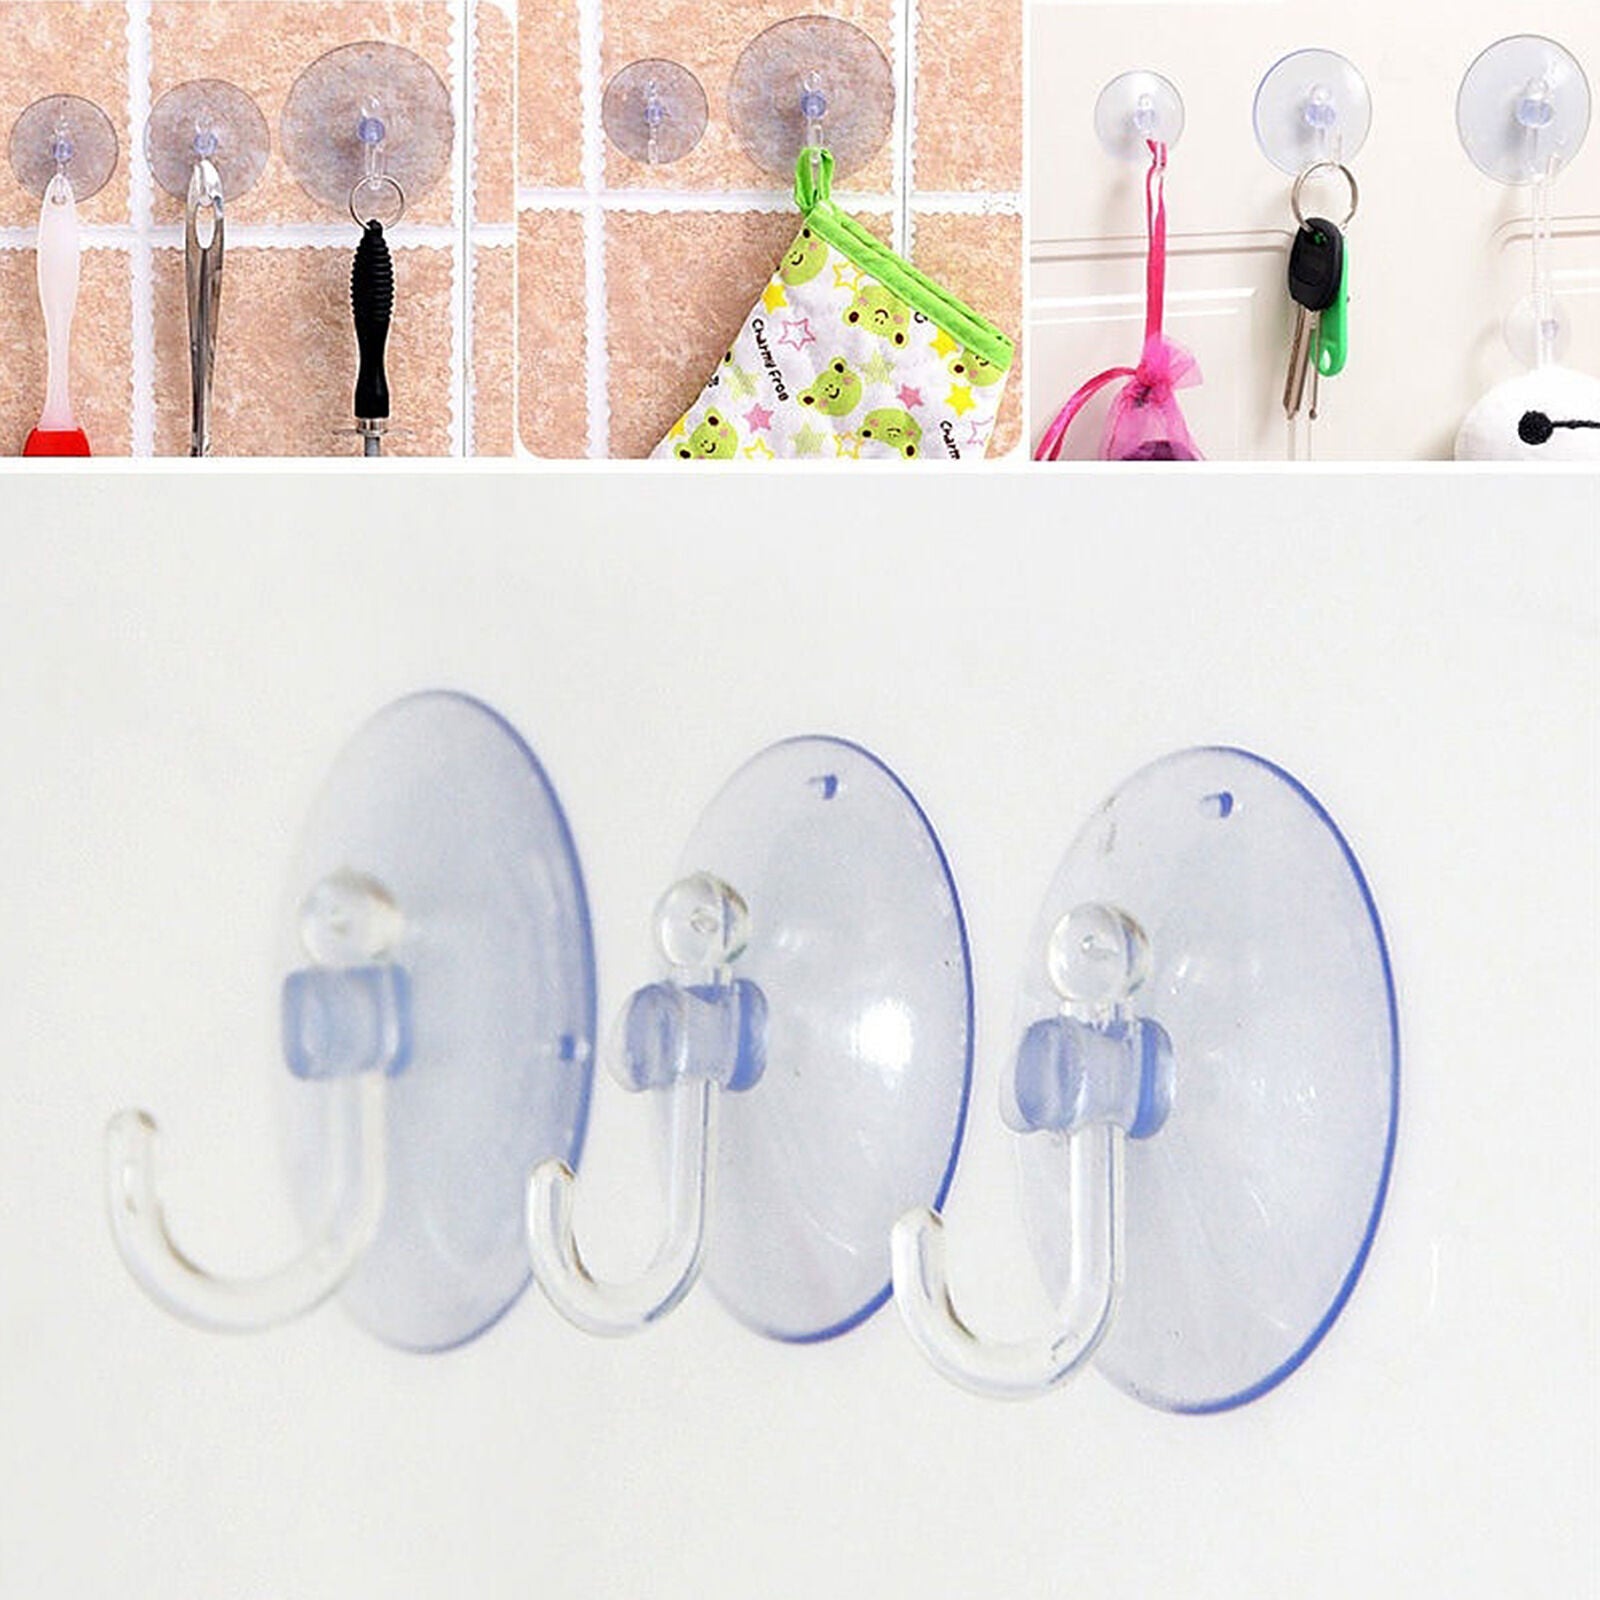 10Pcs Home Wall Hooks Suckers Kitchen Bathroom Hangers Suction Cup Hooks Utility